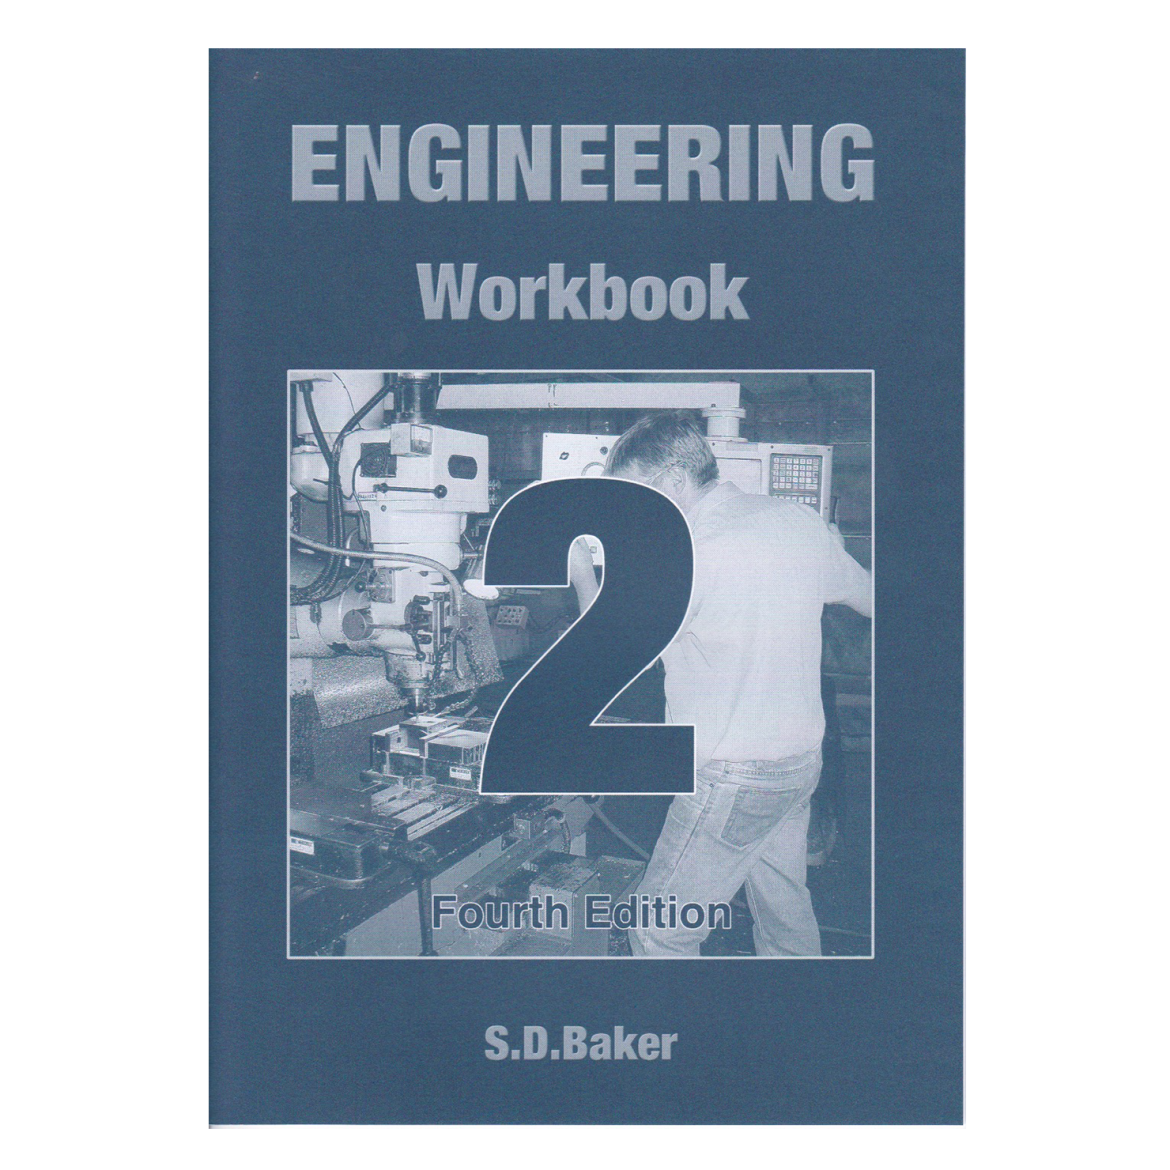 ENGINEERING-Workbook-2-4th-Edition.png